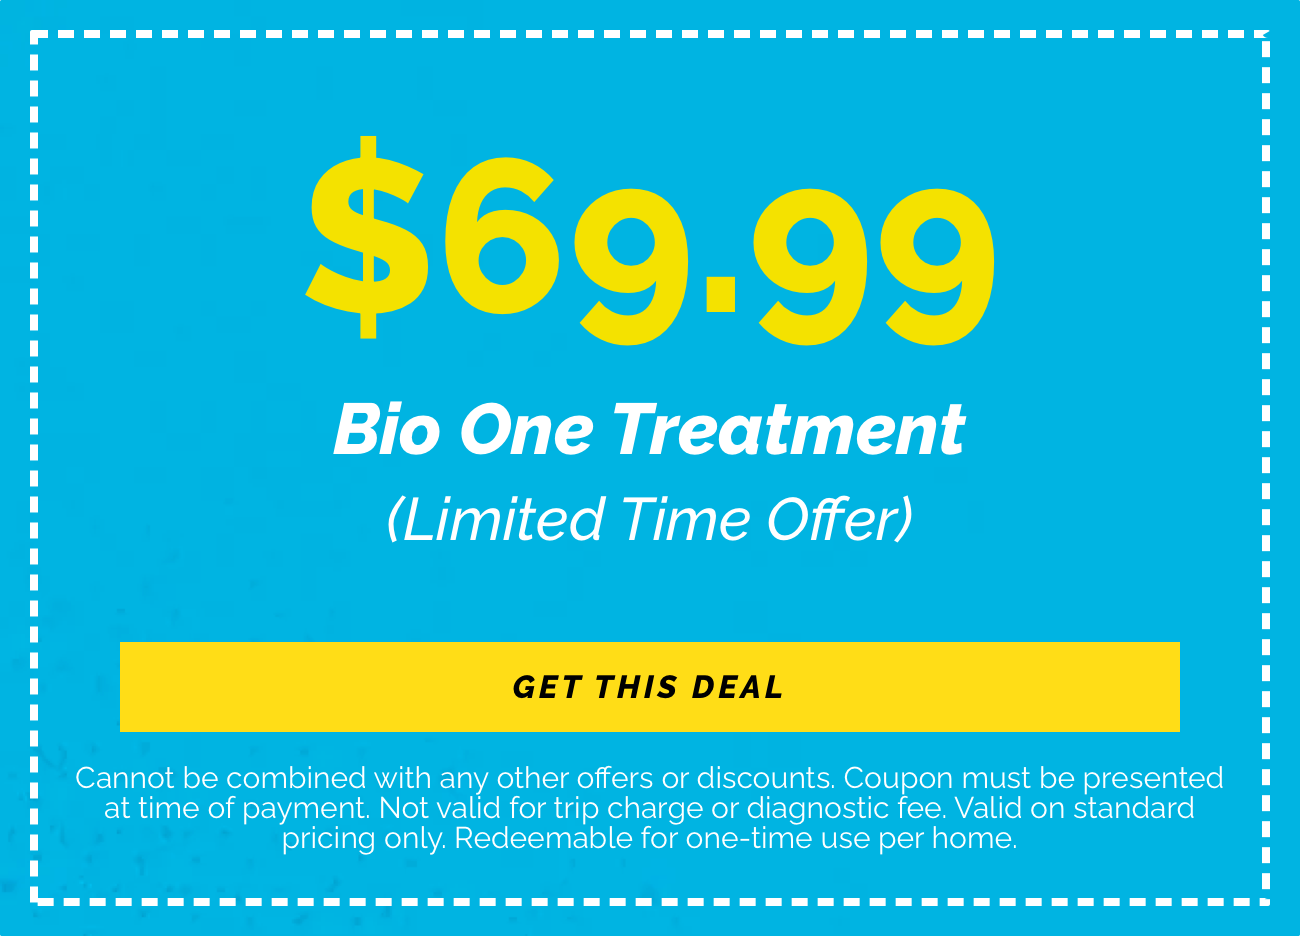 Bio One Treatment - Limited Time Offer